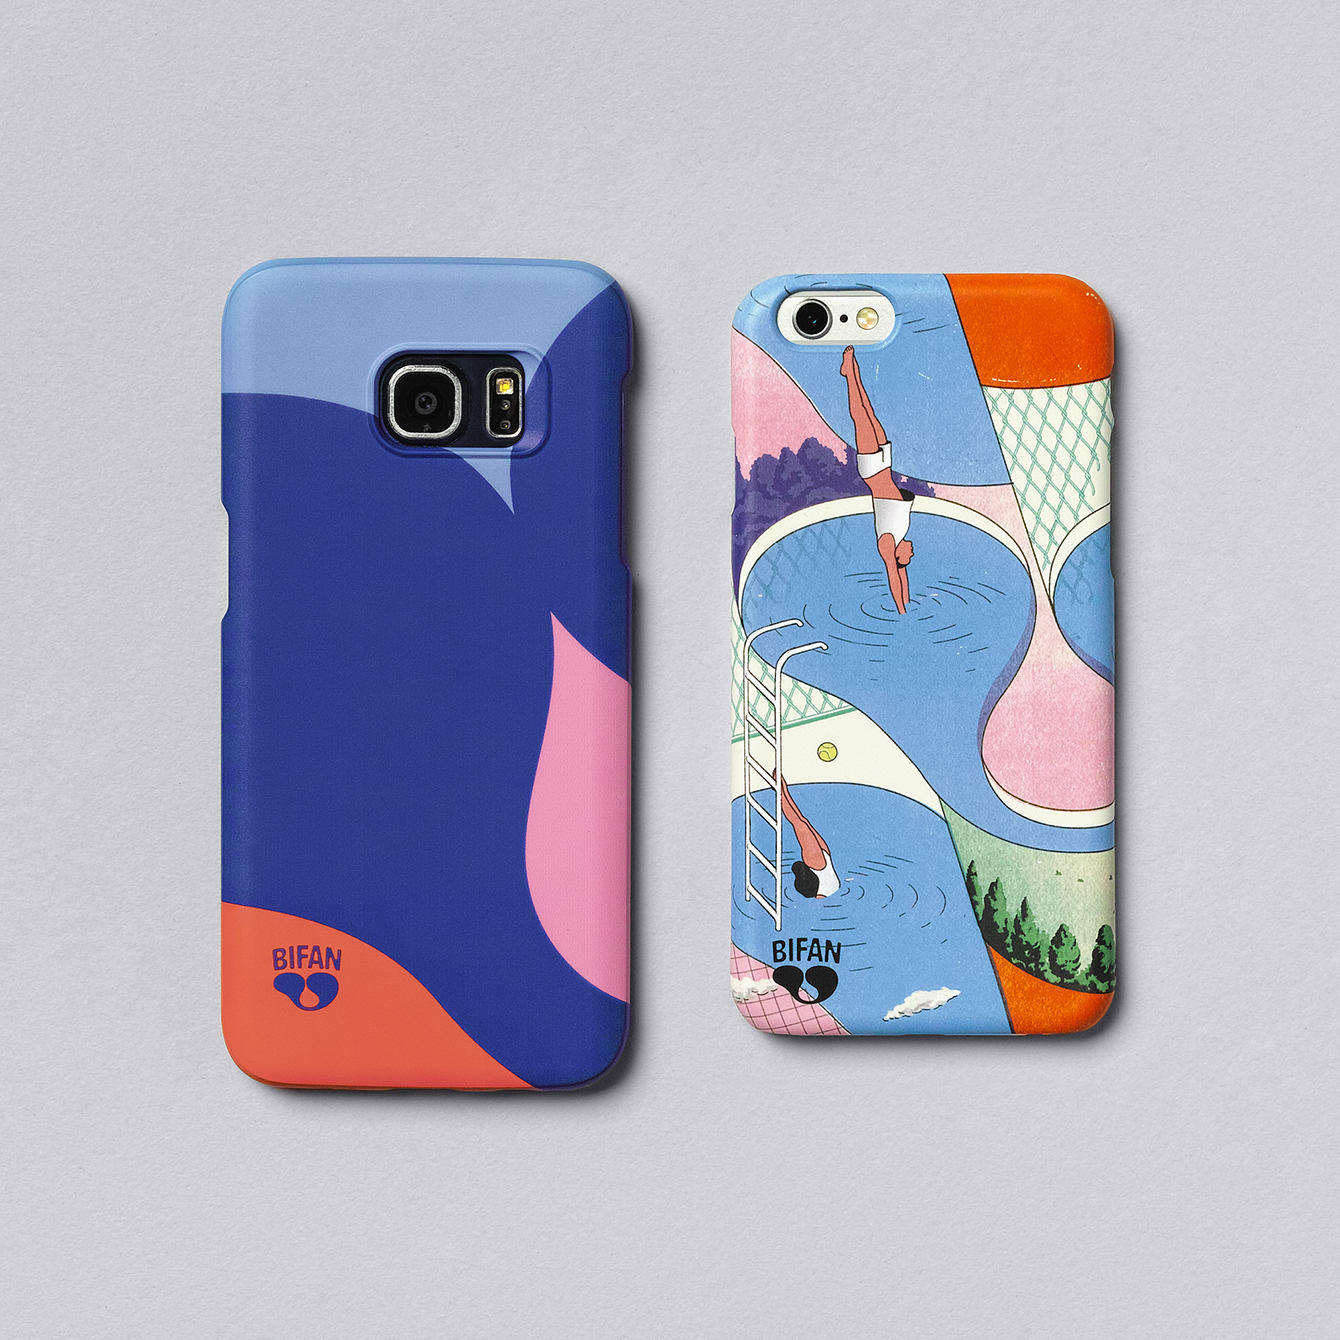 Brand identity and branded phone covers by Studio fnt for 20th Bucheon International Fantastic Film Festival, South Korea